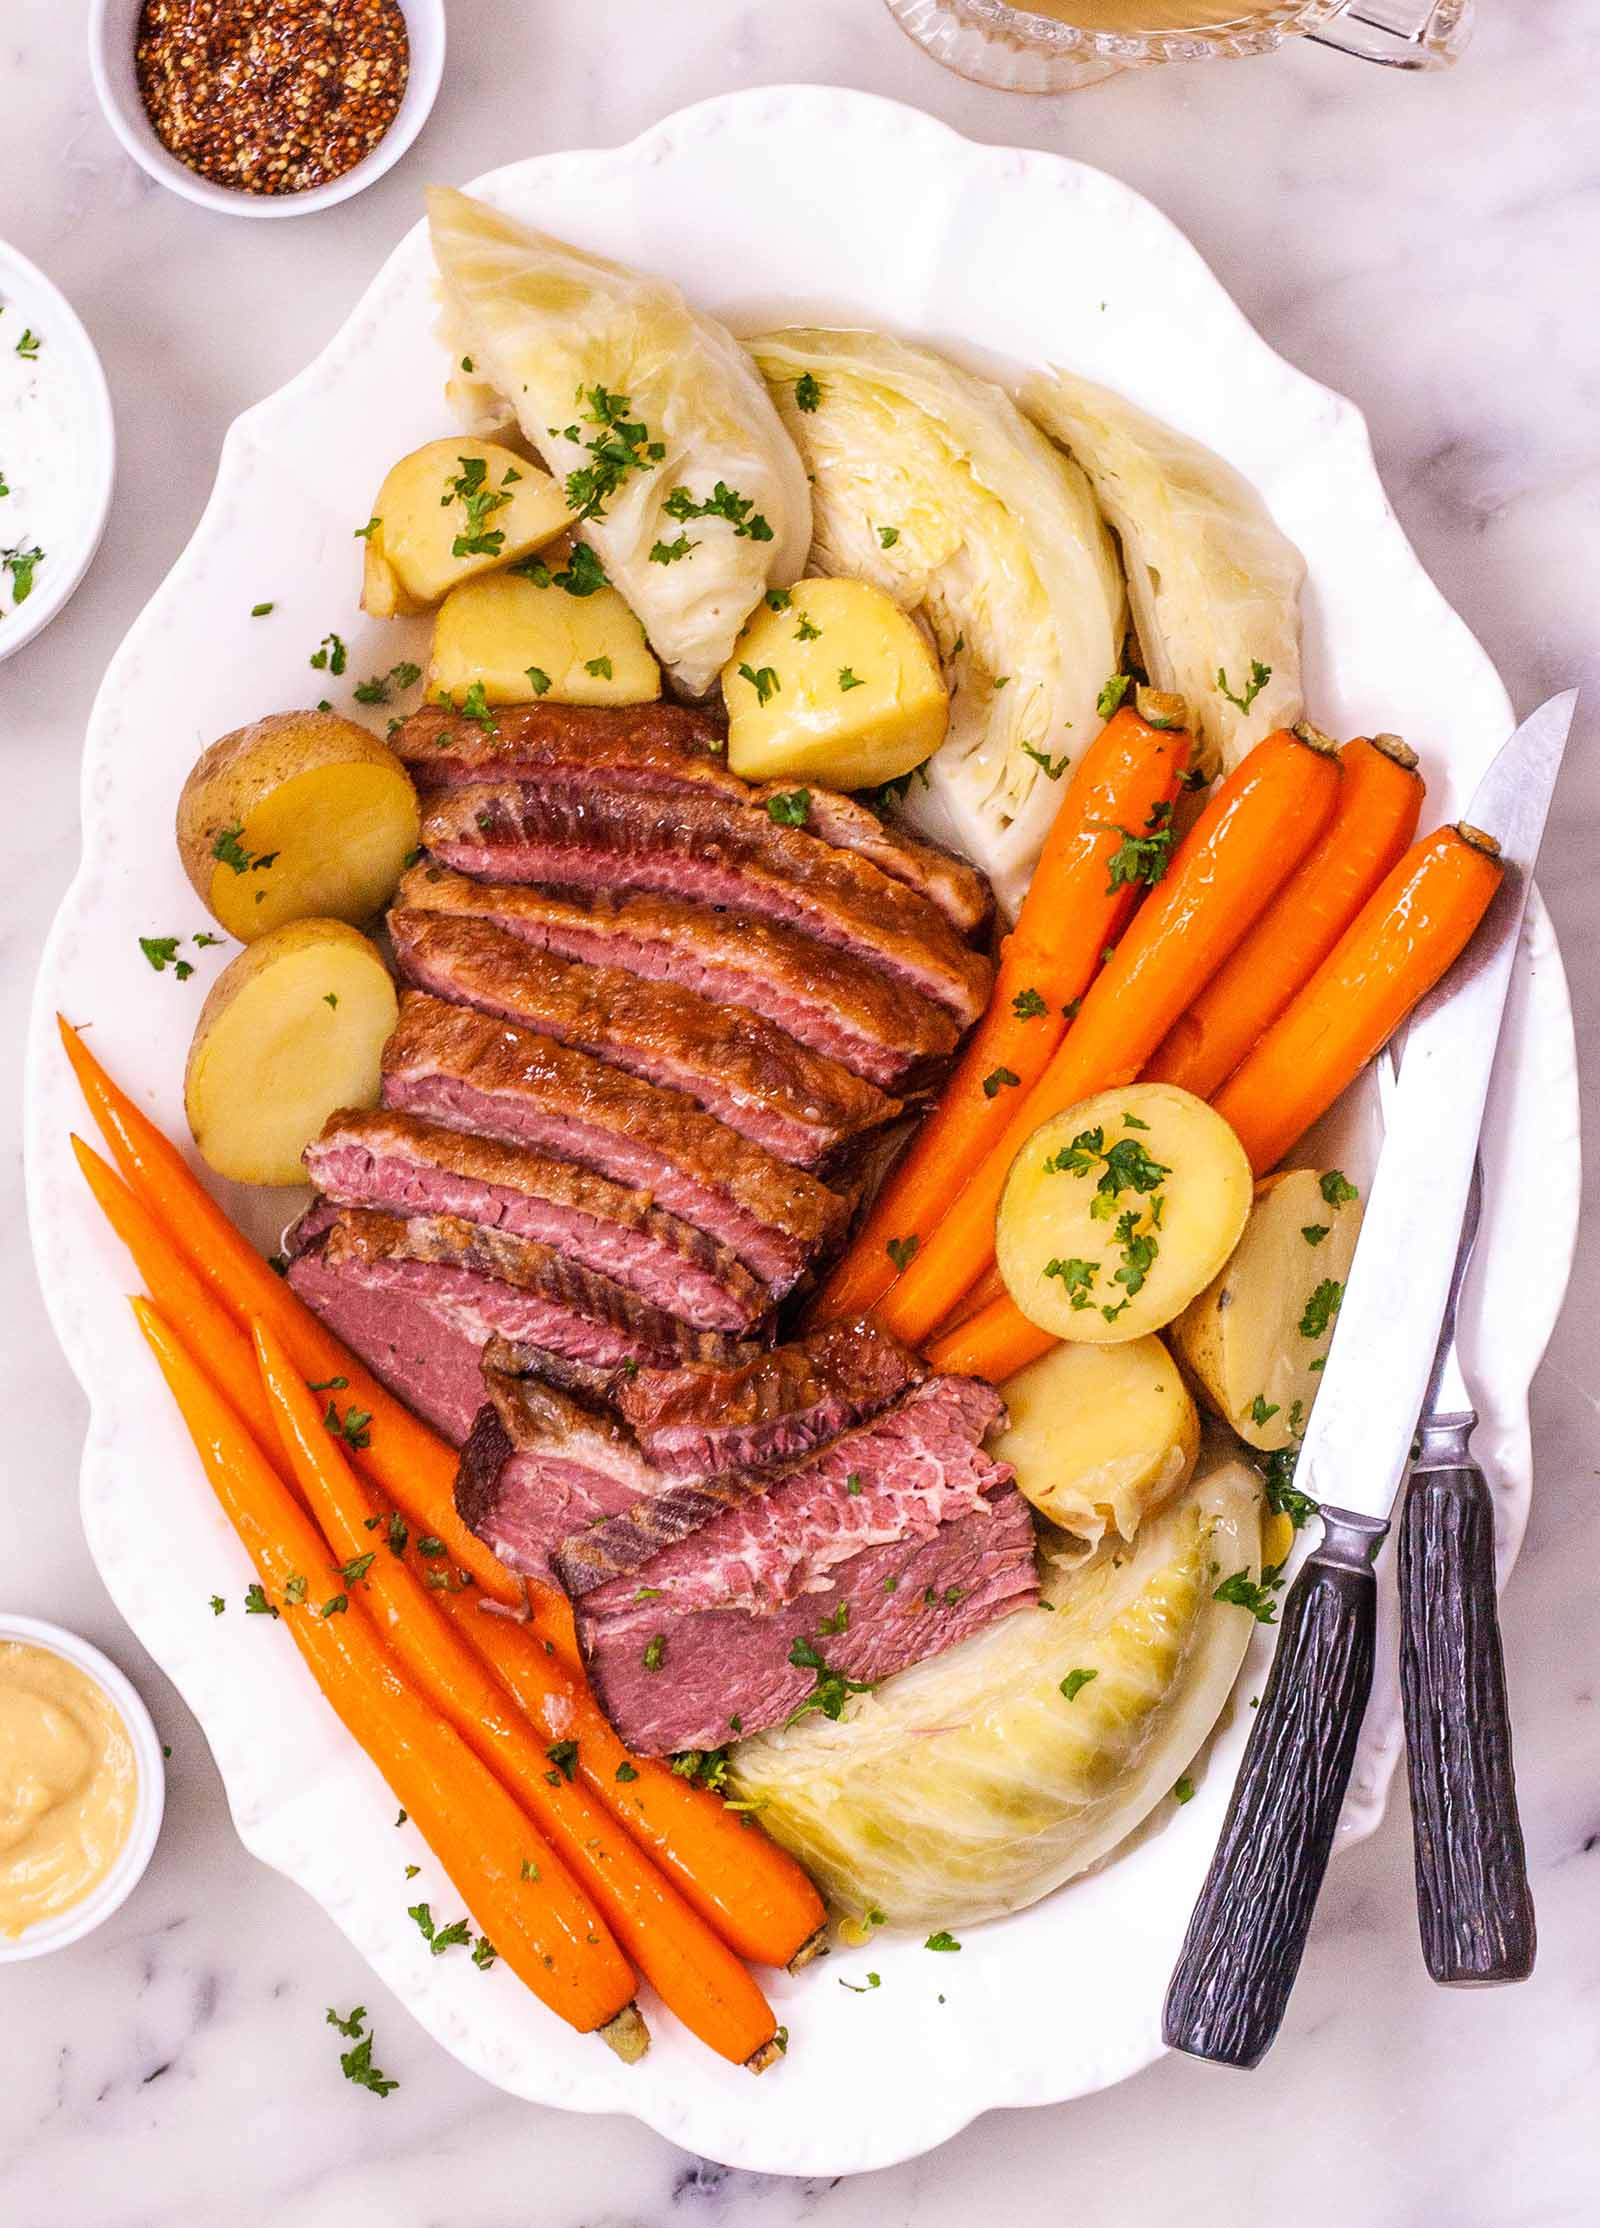 How to Boil Corned Beef and Cabbage - platter of sliced corned beef, carrots, potatoes, and cabbage sprinkled with herbs